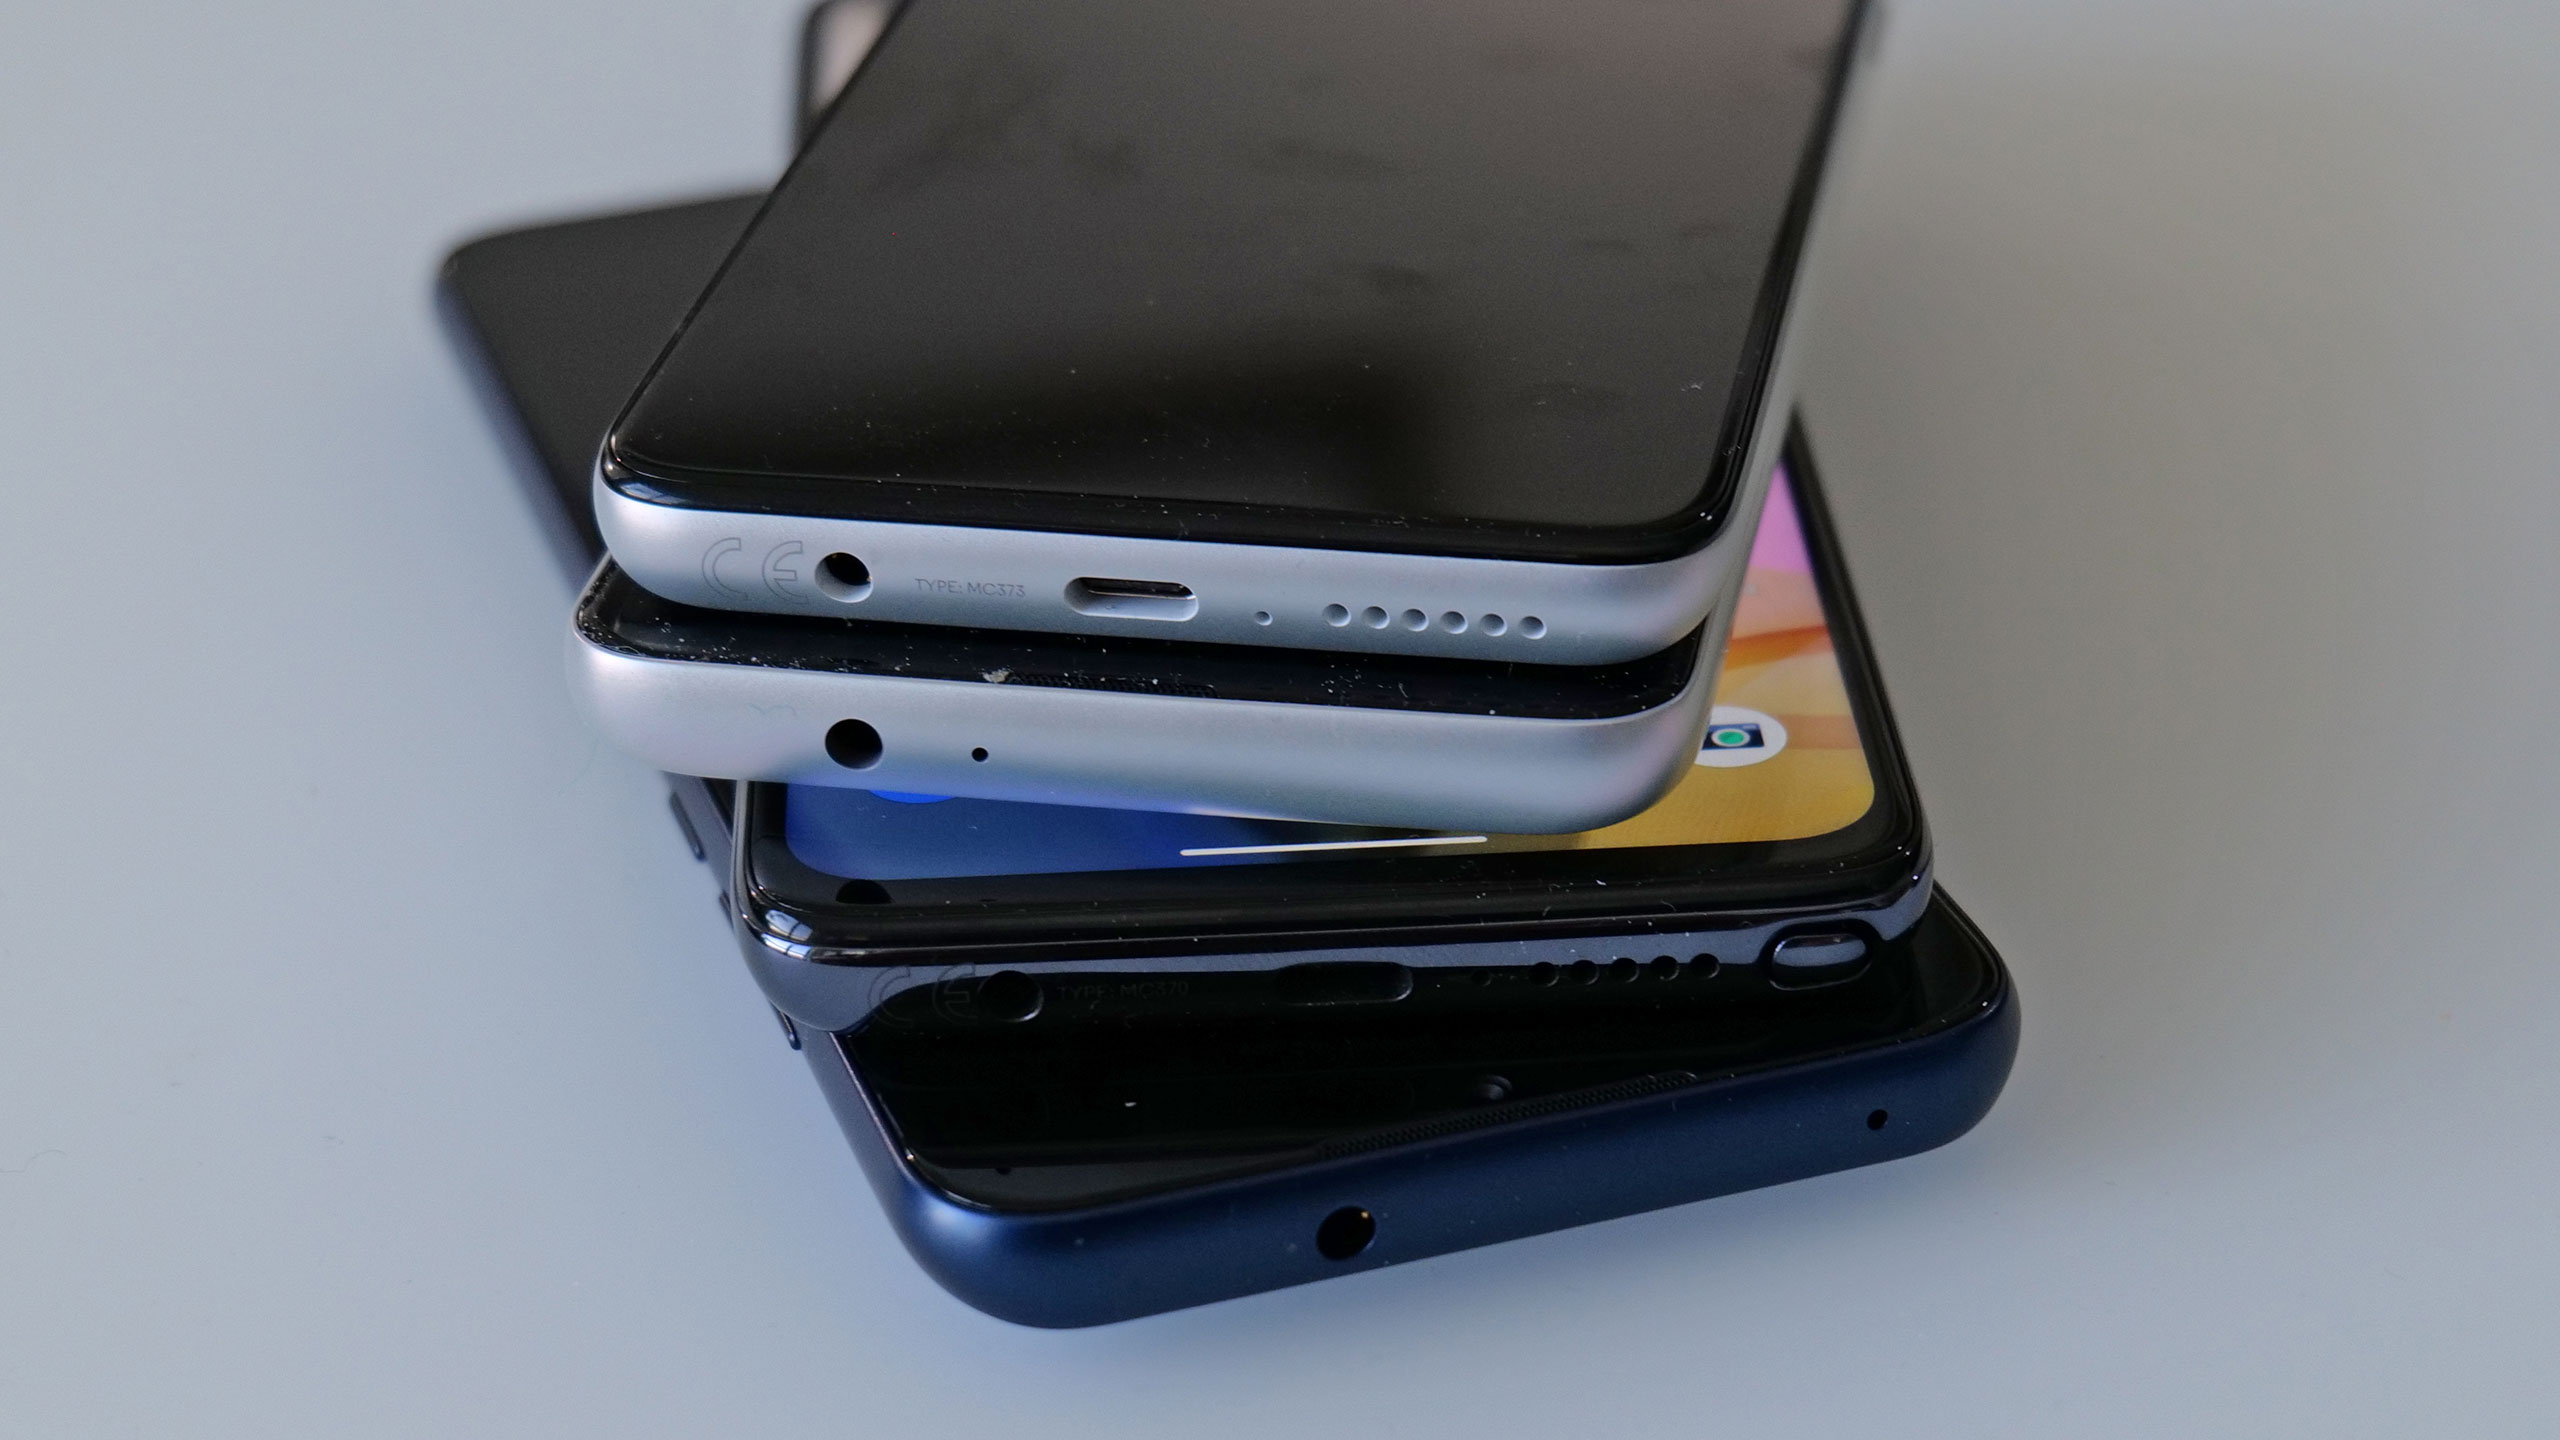 Every Moto (at least these ones) gets a headphone jack.  (Photo: Sam Rutherford)